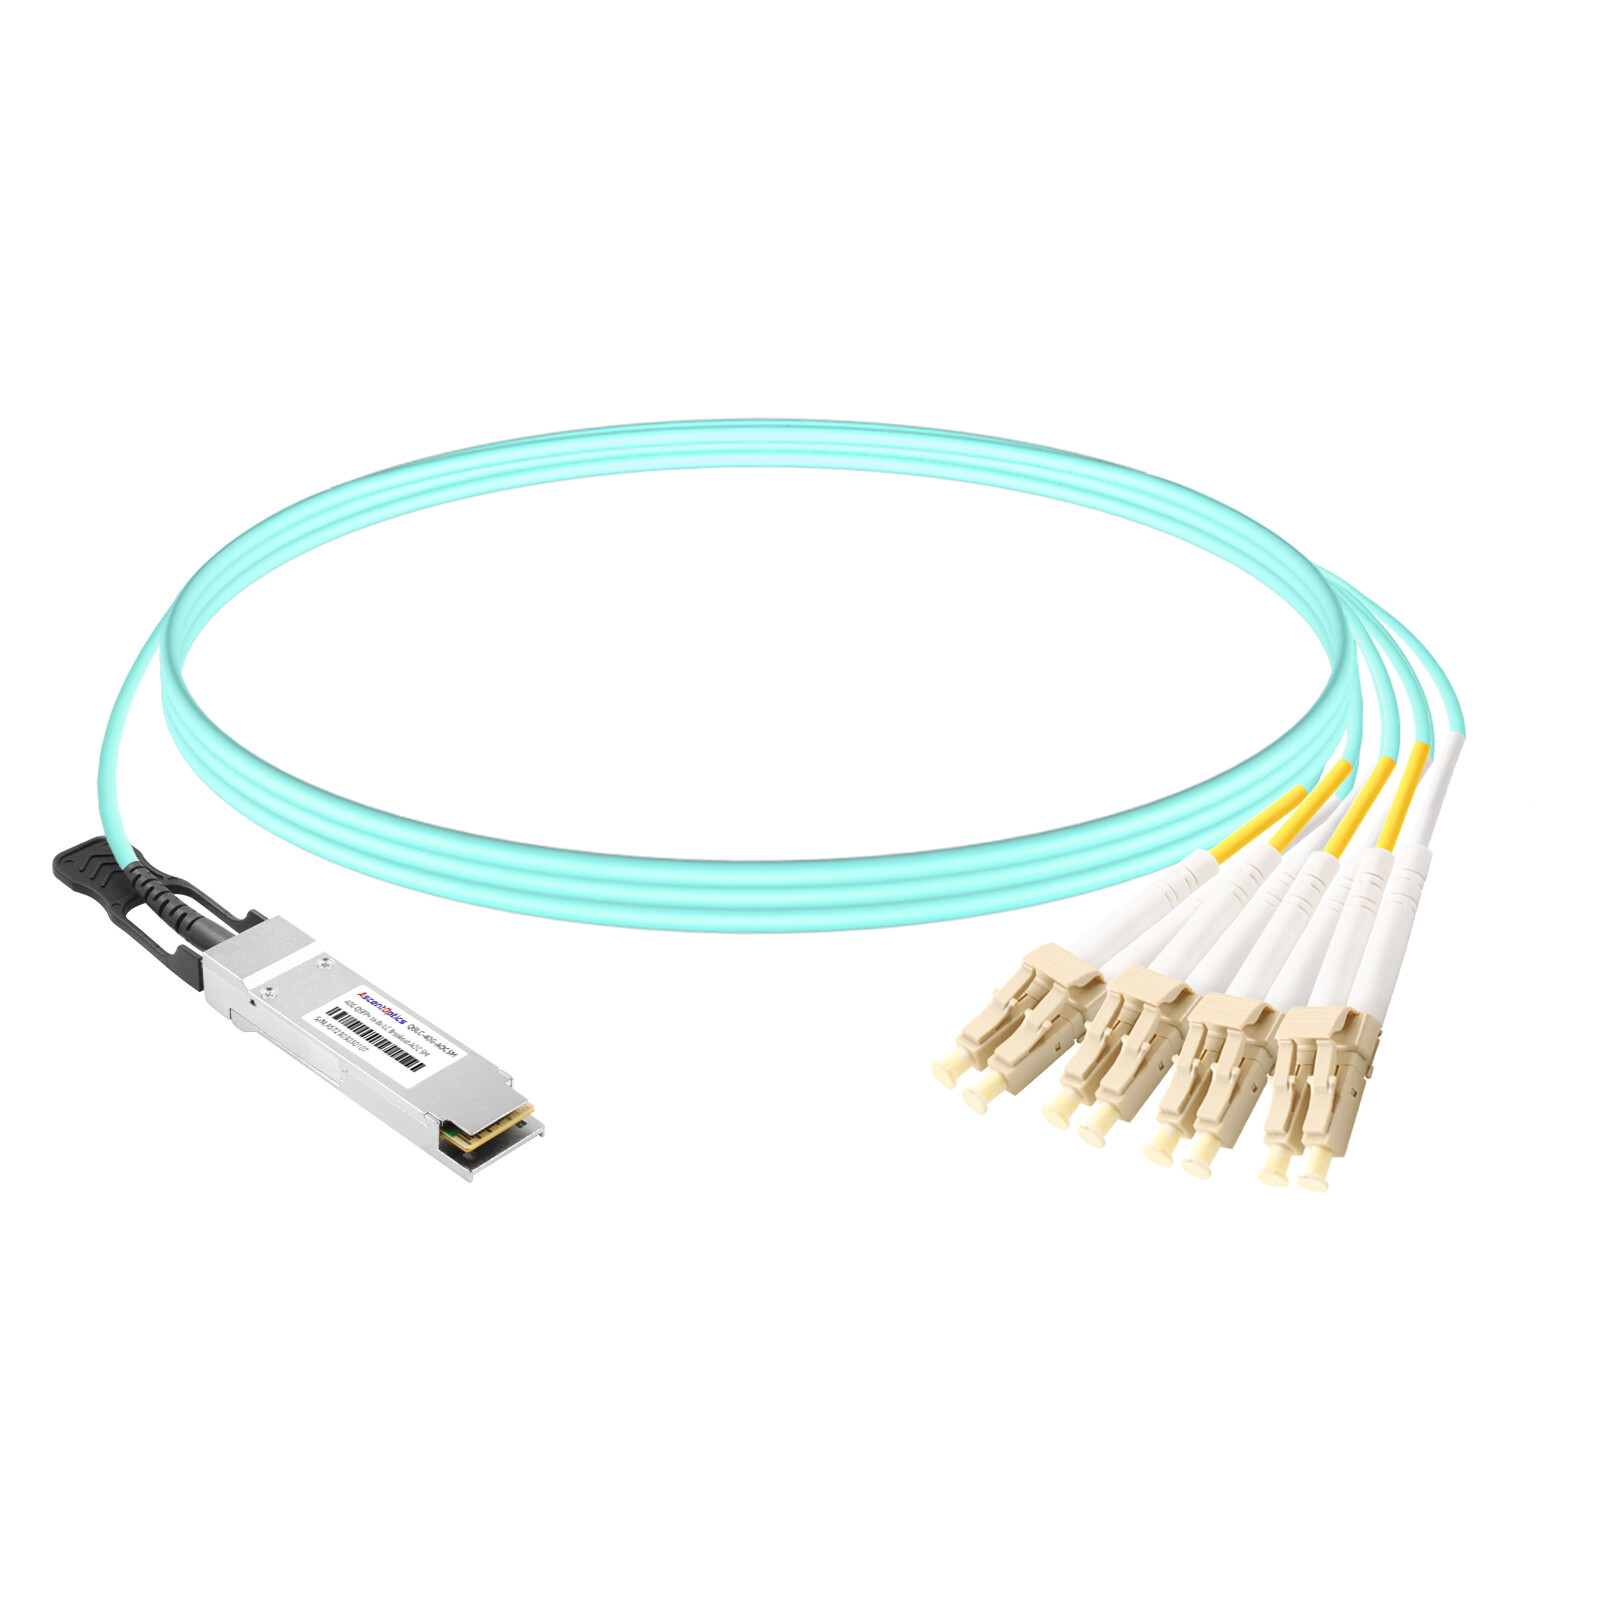 40G QSFP+ to 8x LC Breakout AOC Cable,5 Meters